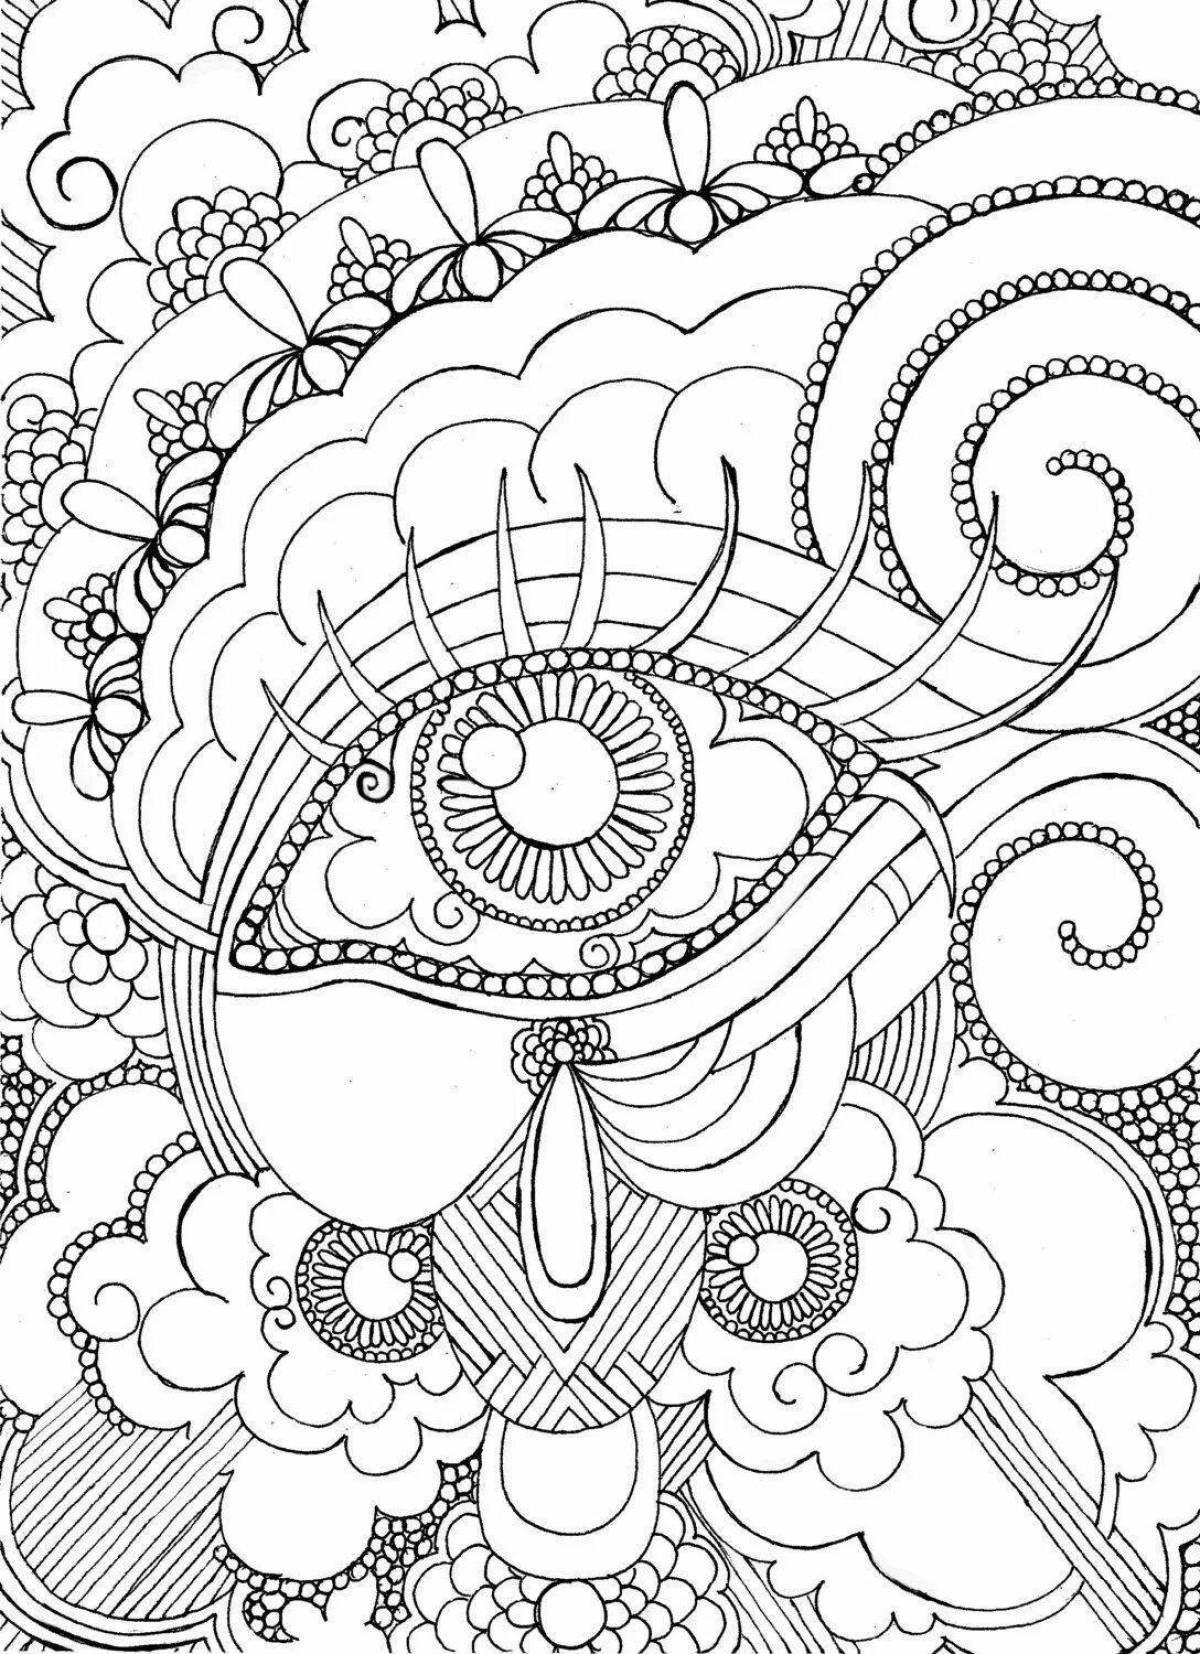 Attractive coloring book for all adults antistress